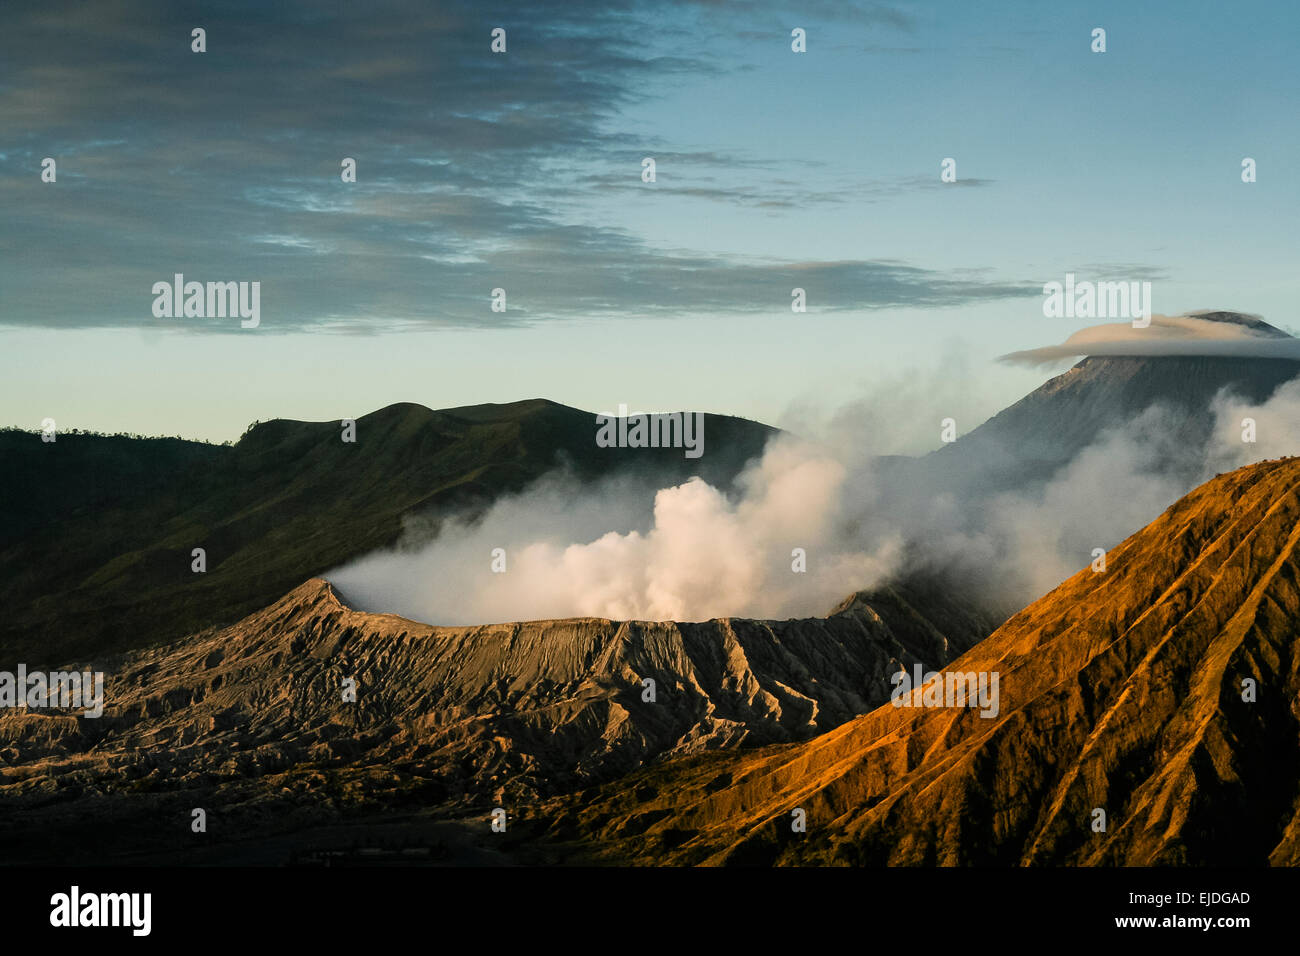 Mt Bromo, Indonesia. View of volcanic Mount Bromo in early morning light. Stock Photo